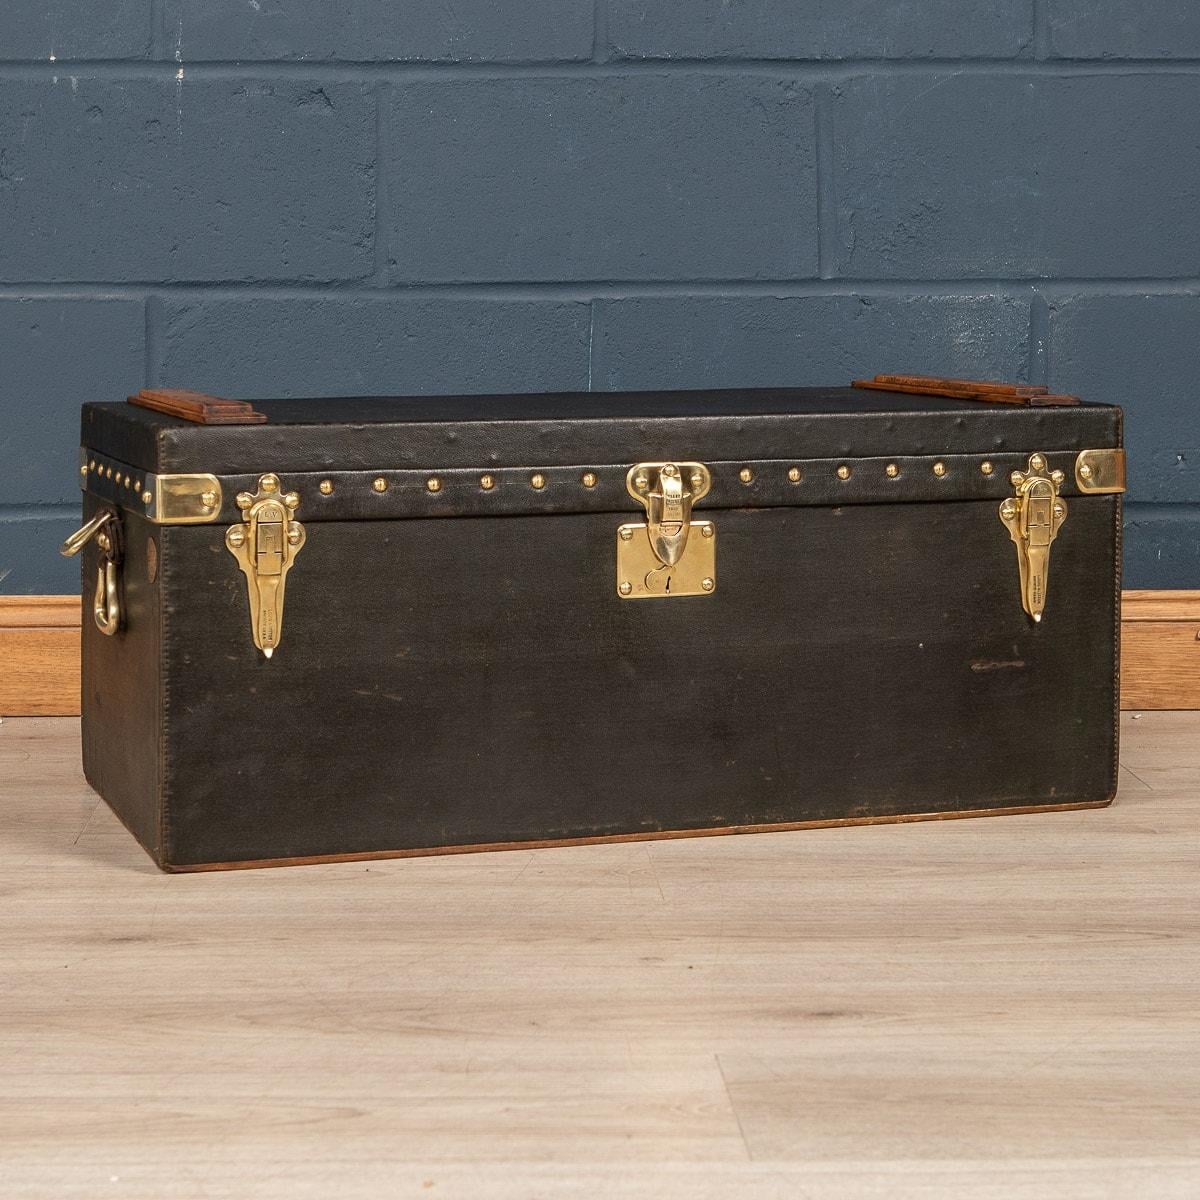 A large and very rare Louis Vuitton car trunk covered in green Vuittonite canvas. Vuittonite is a stain and water resistant canvas that was used on Vuitton’s trunks from the turn of the century to 1920‘s. Car trunks were usually bespoke, made for